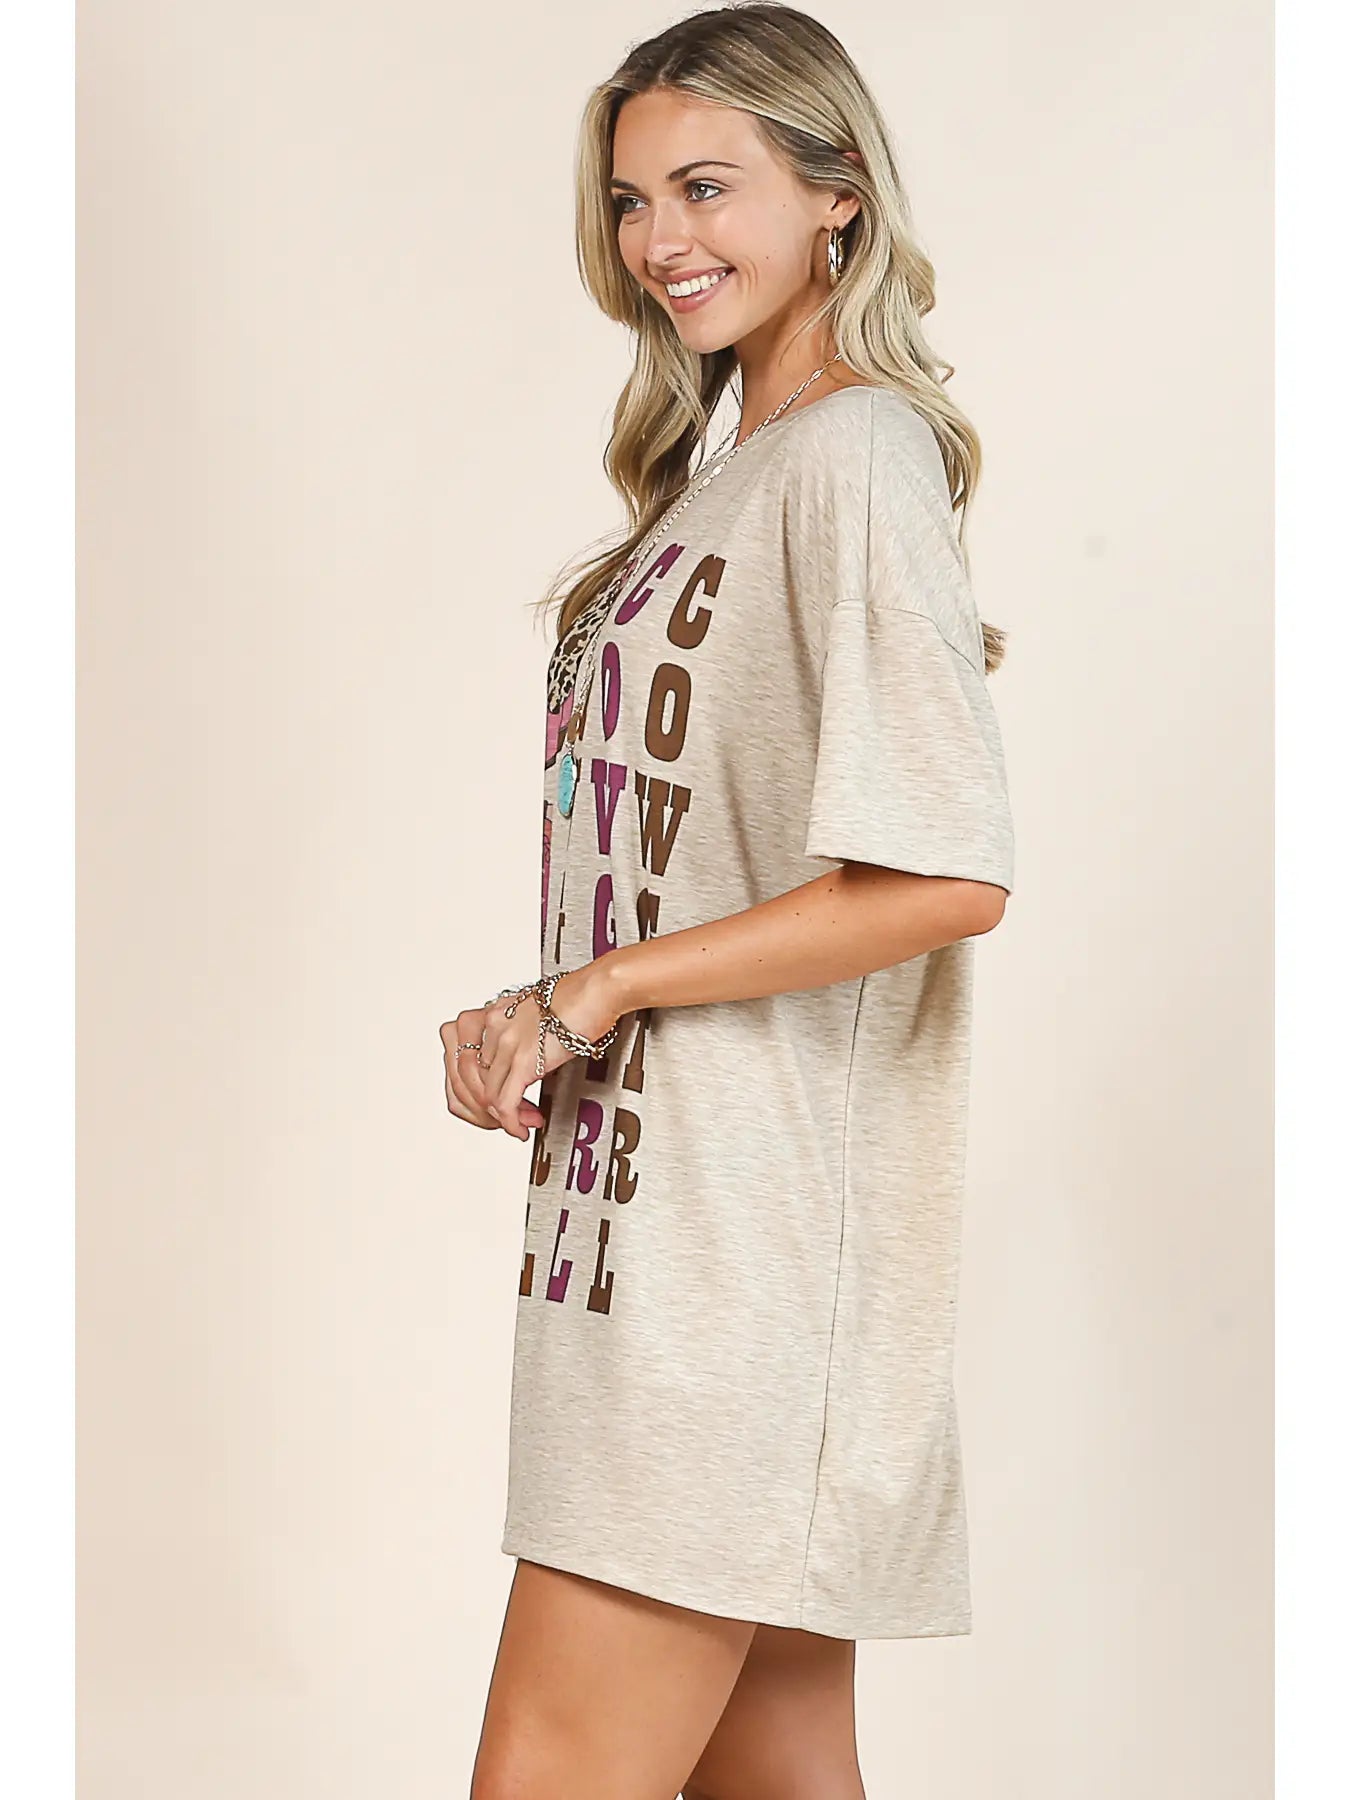 Cowgirl Boots T-Shirt Dress